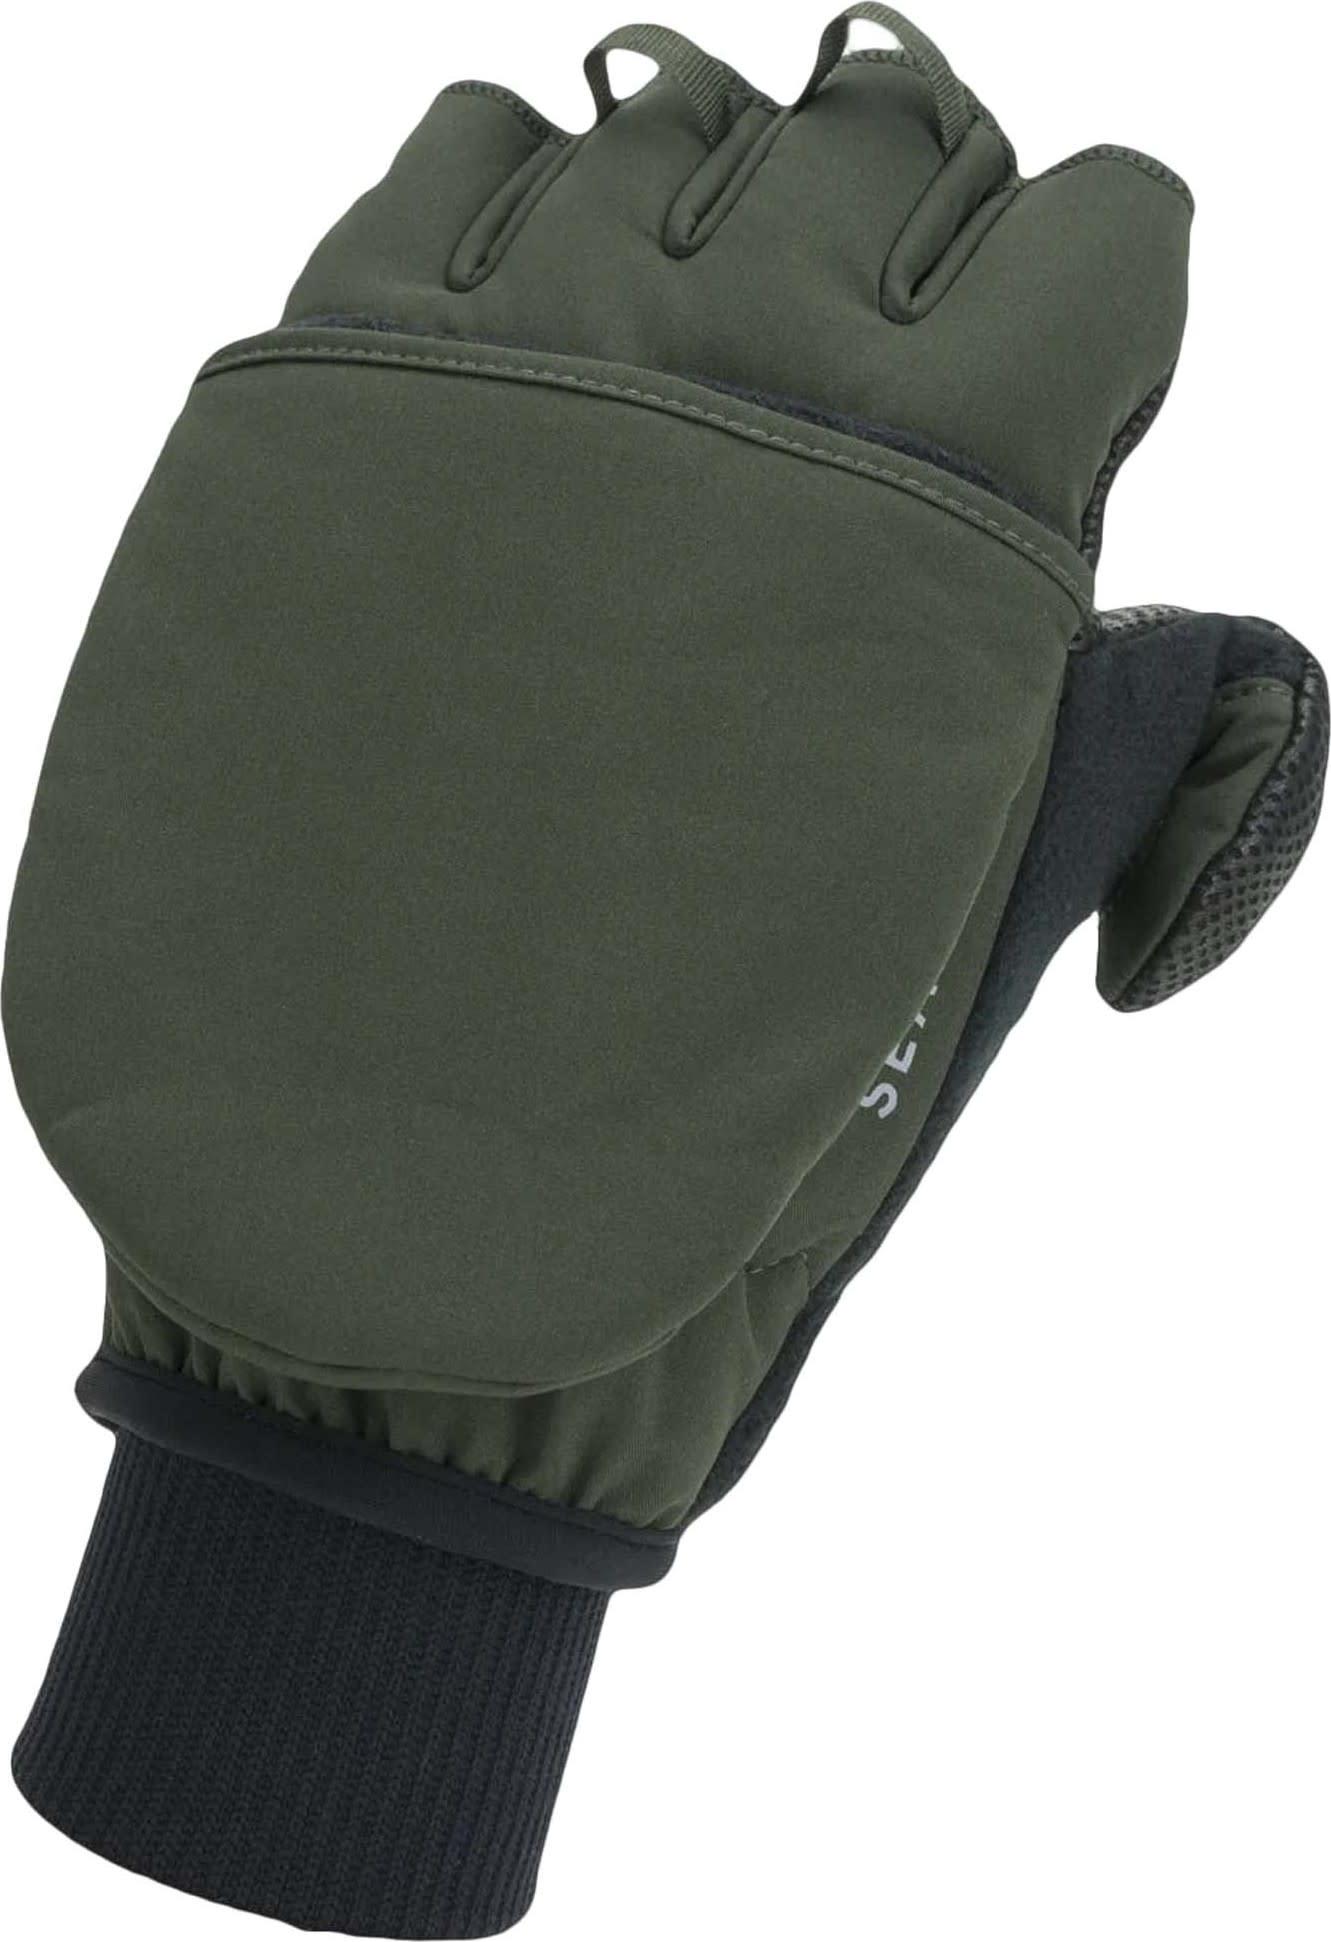 Sealskinz Windproof Cold Weather Convertible Mitt Olive Green/Black